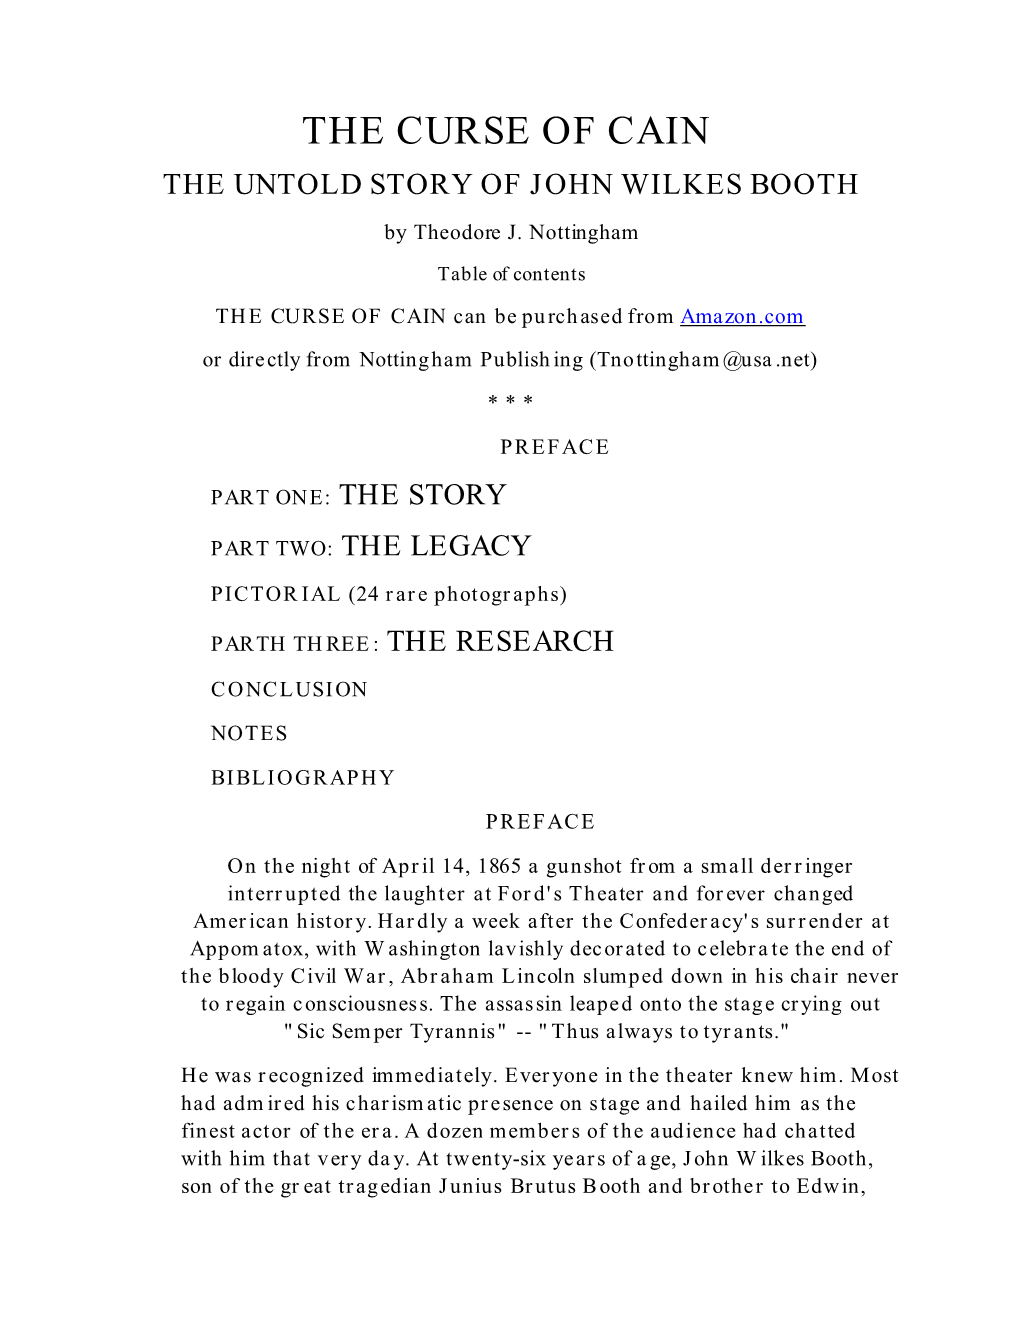 The Curse of Cain the Untold Story of John Wilkes Booth